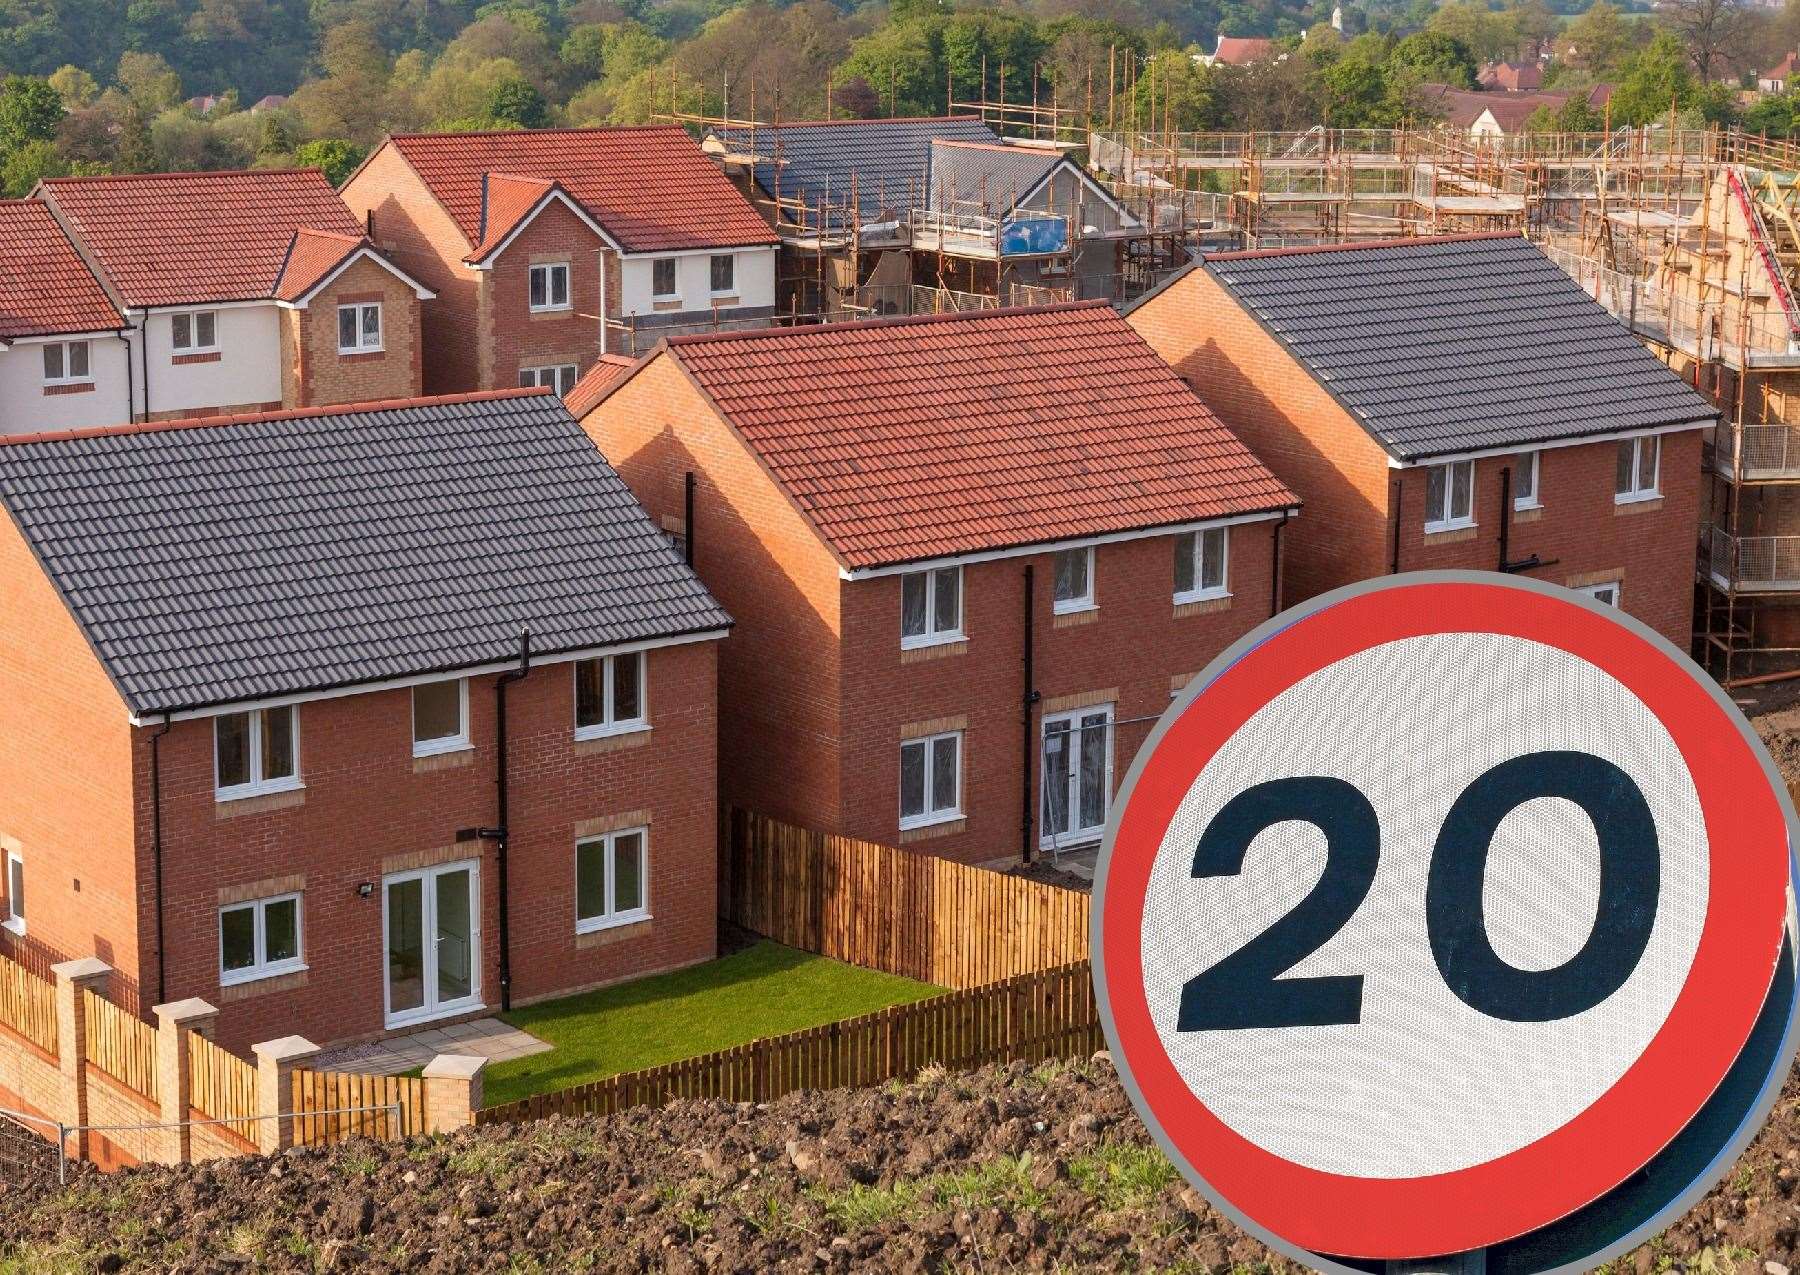 New estates will be designed for 20mph, but the speed will not be enforced